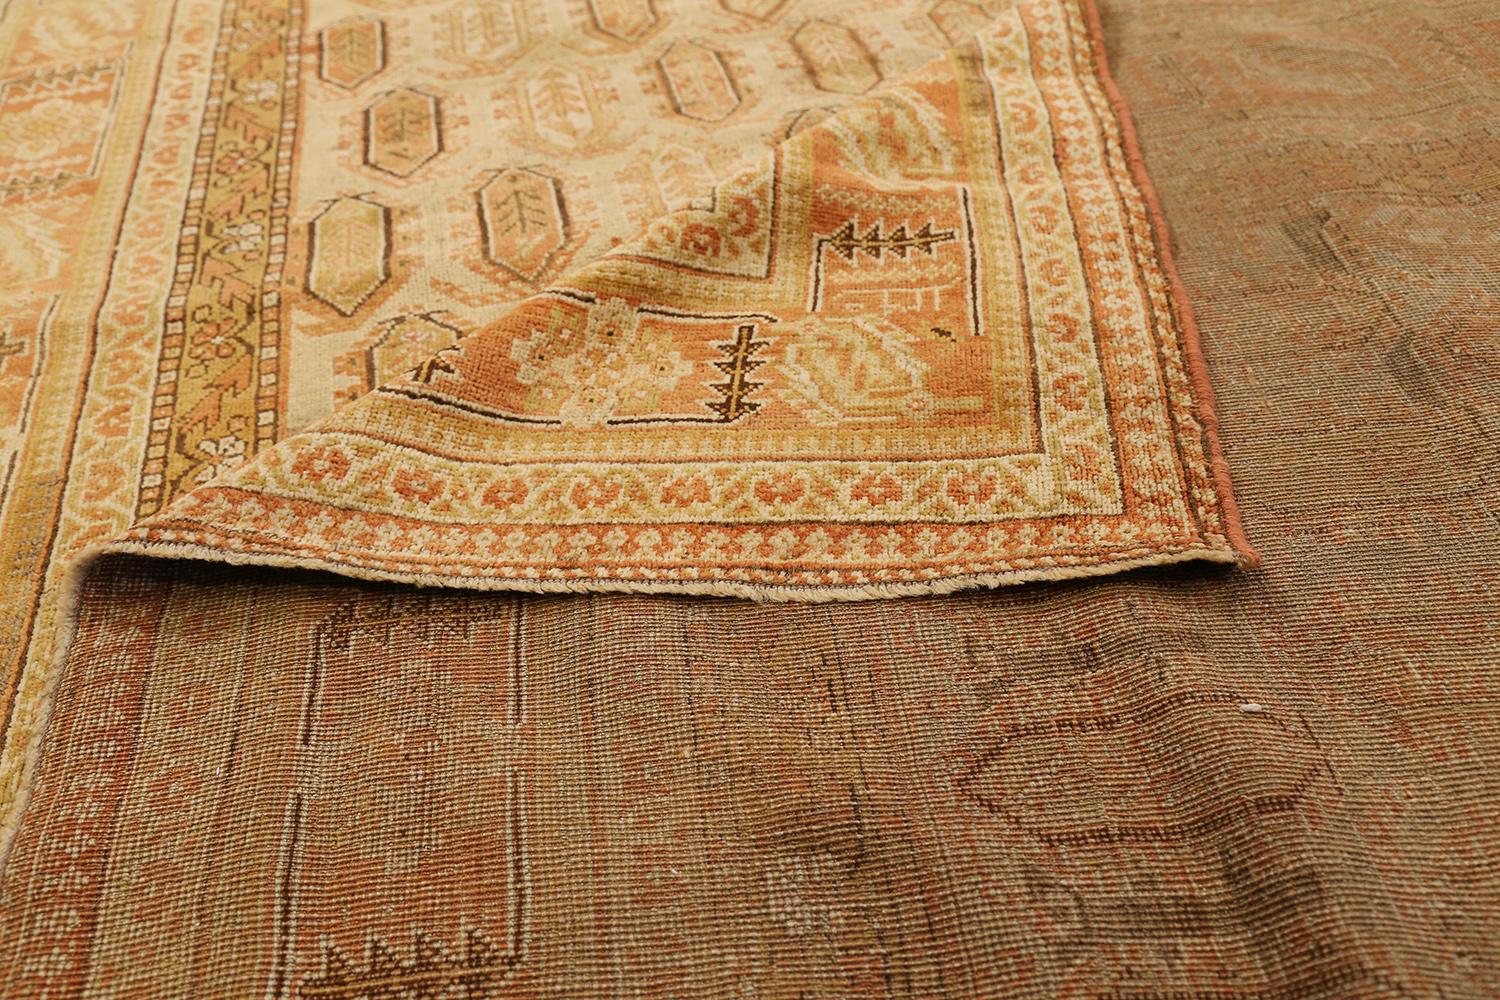 Hand-Woven Large Antique Persian Shiraz Rug with Brown & Orange Geometric Details All-Over For Sale